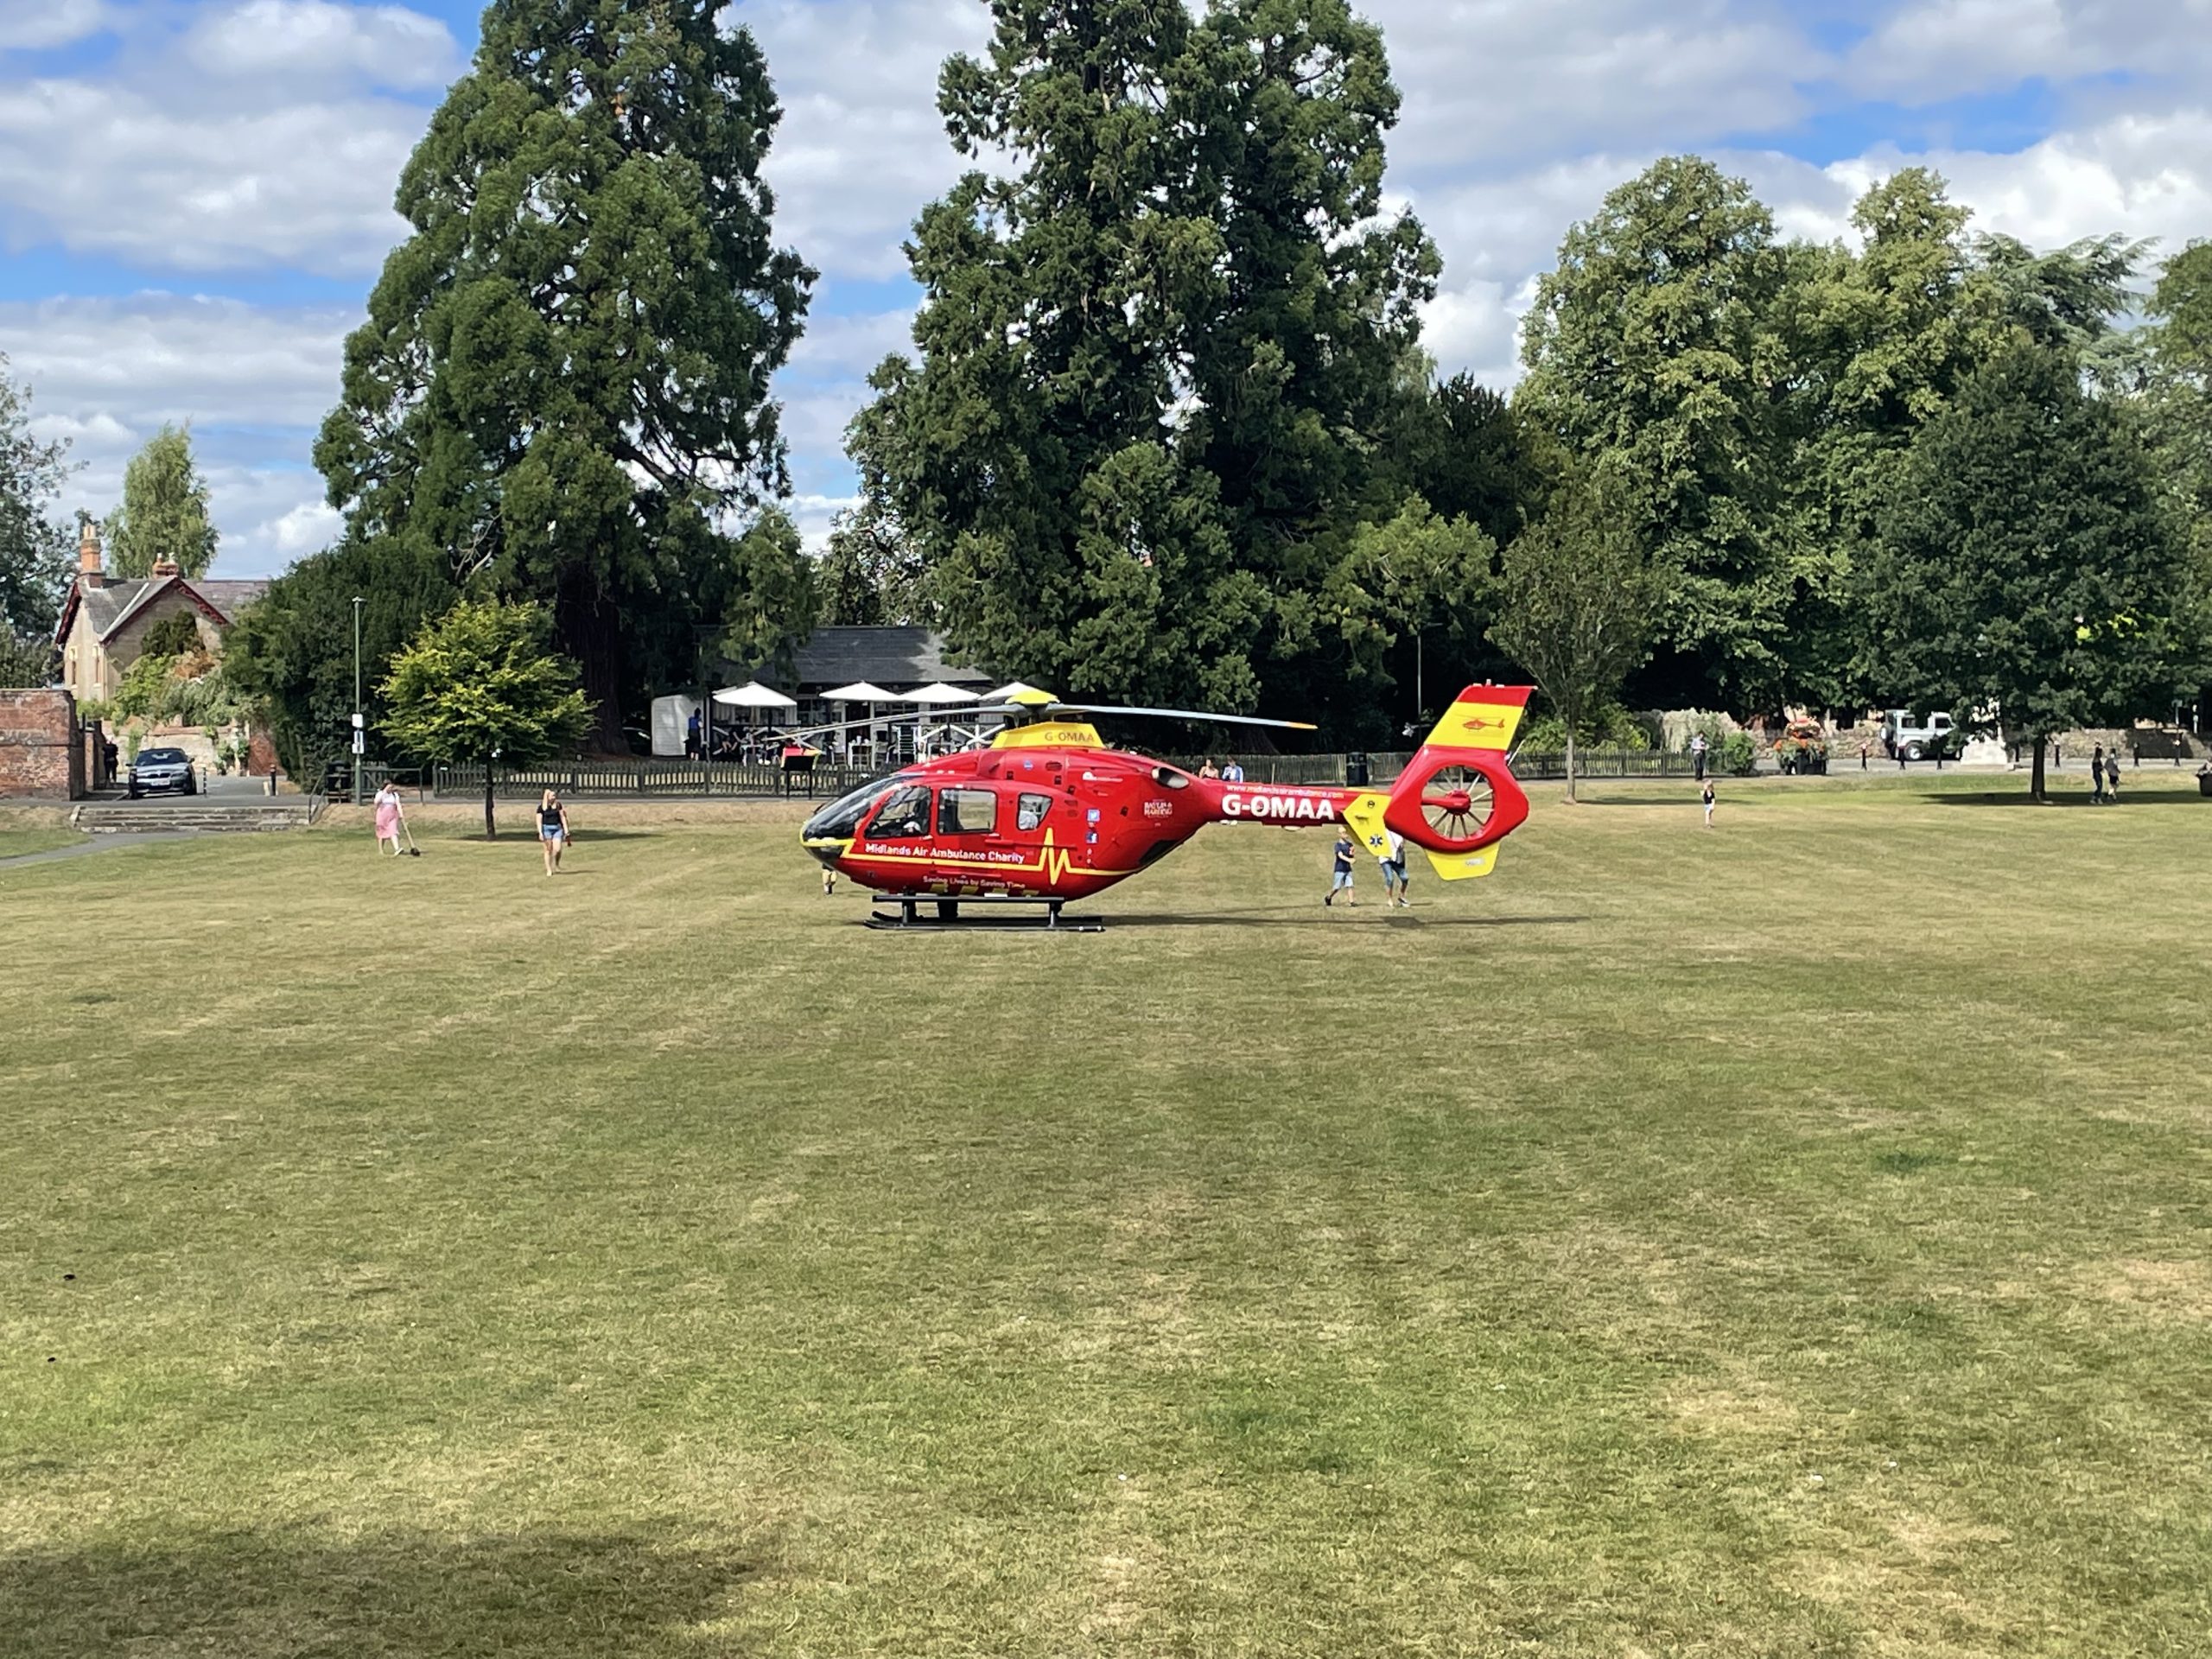 NEWS | Hereford & Worcester Fire and Rescue Service provide update on collision in Leominster